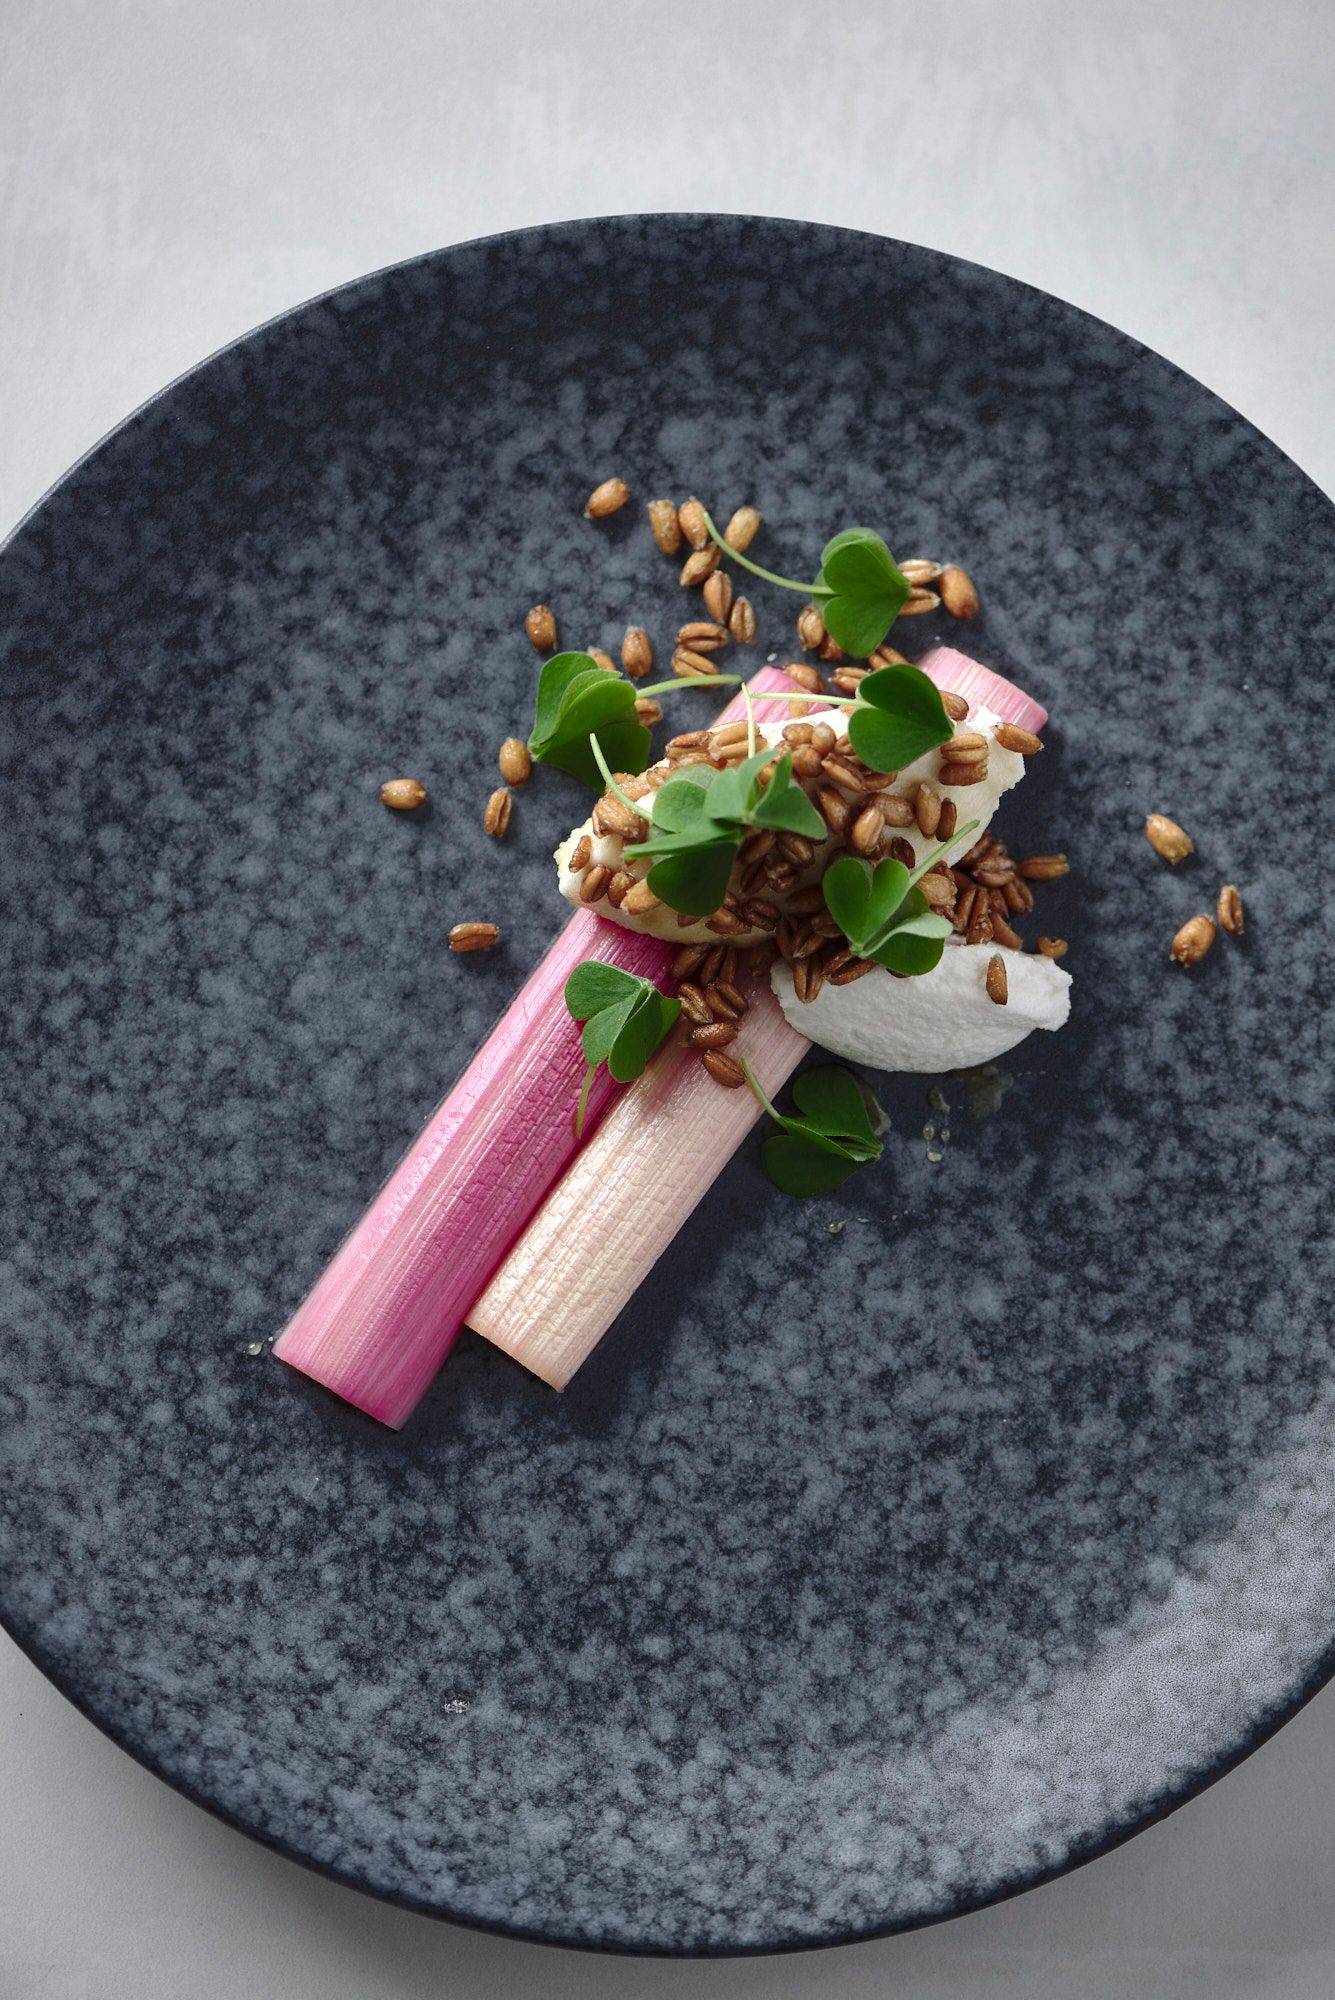 braised rhubarb with vegan ricotta spelt pops and sorrel on a blue plate with sapienstone top